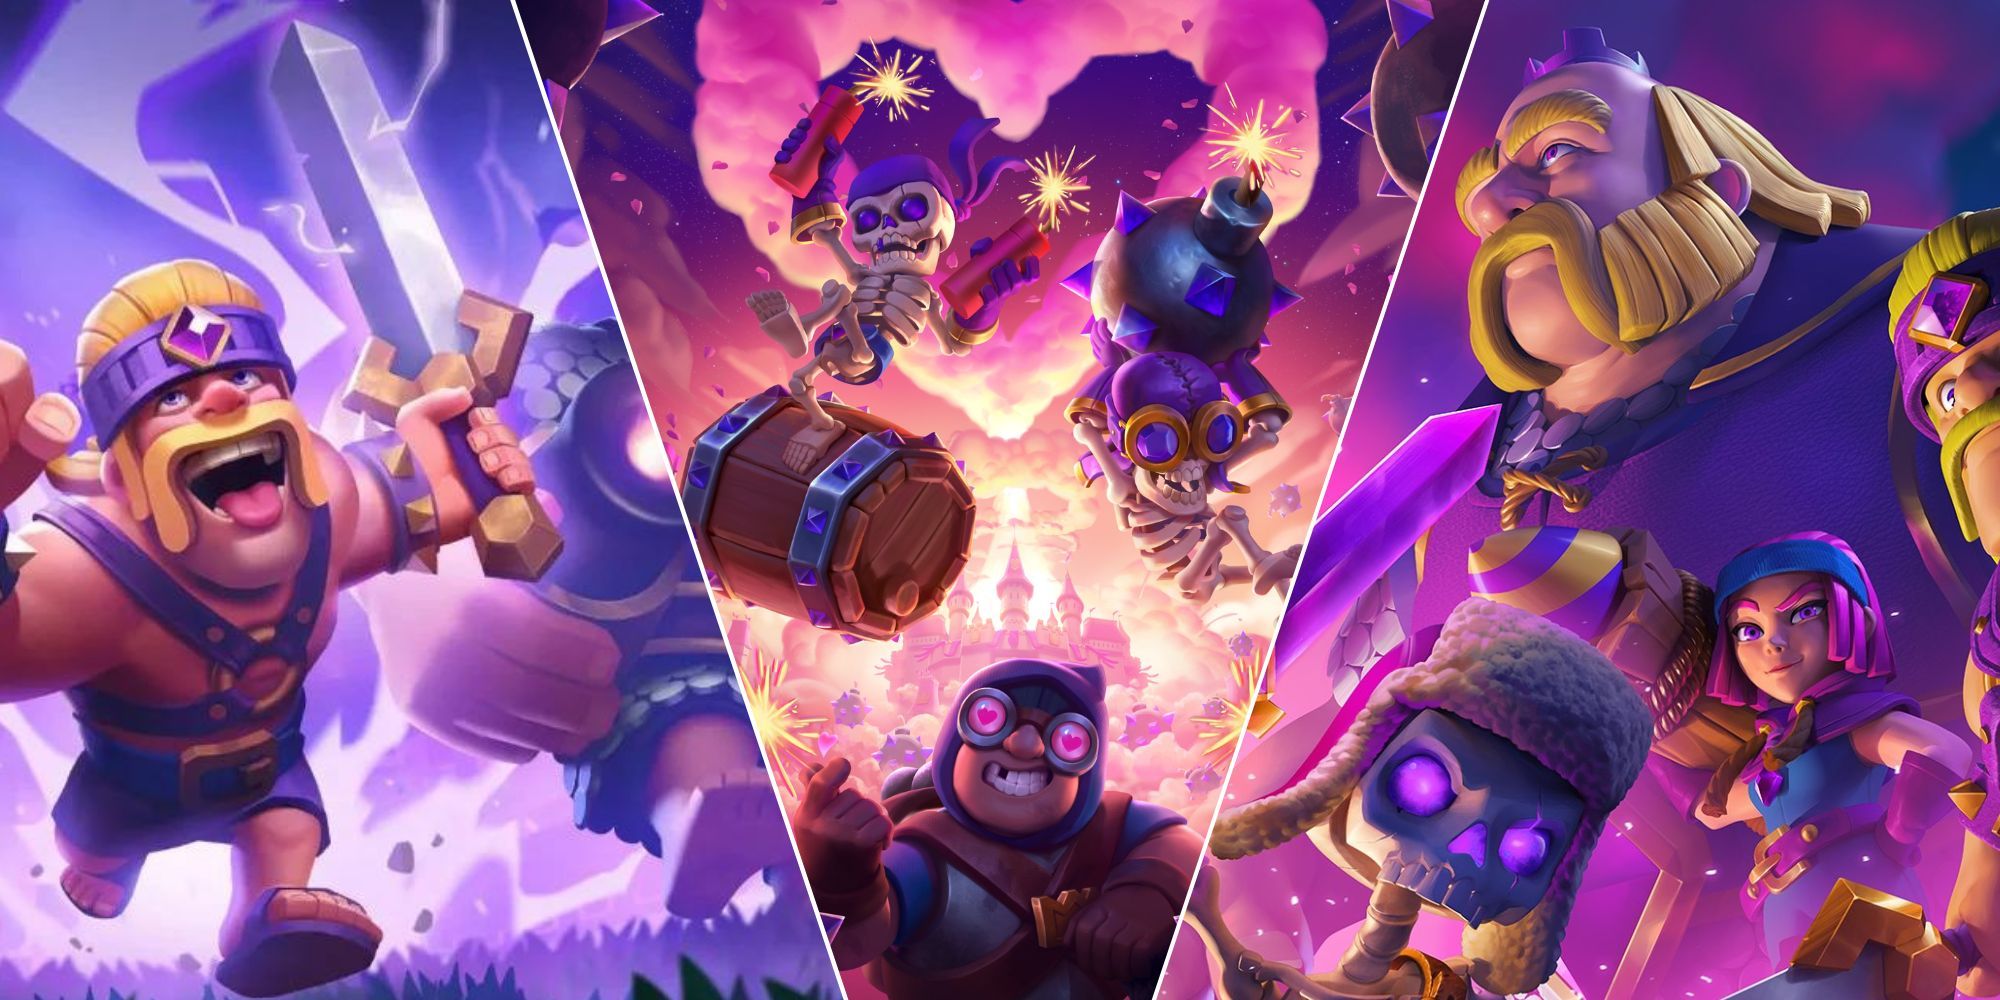 Loading Screens in Clash Royale With Evolution Cards